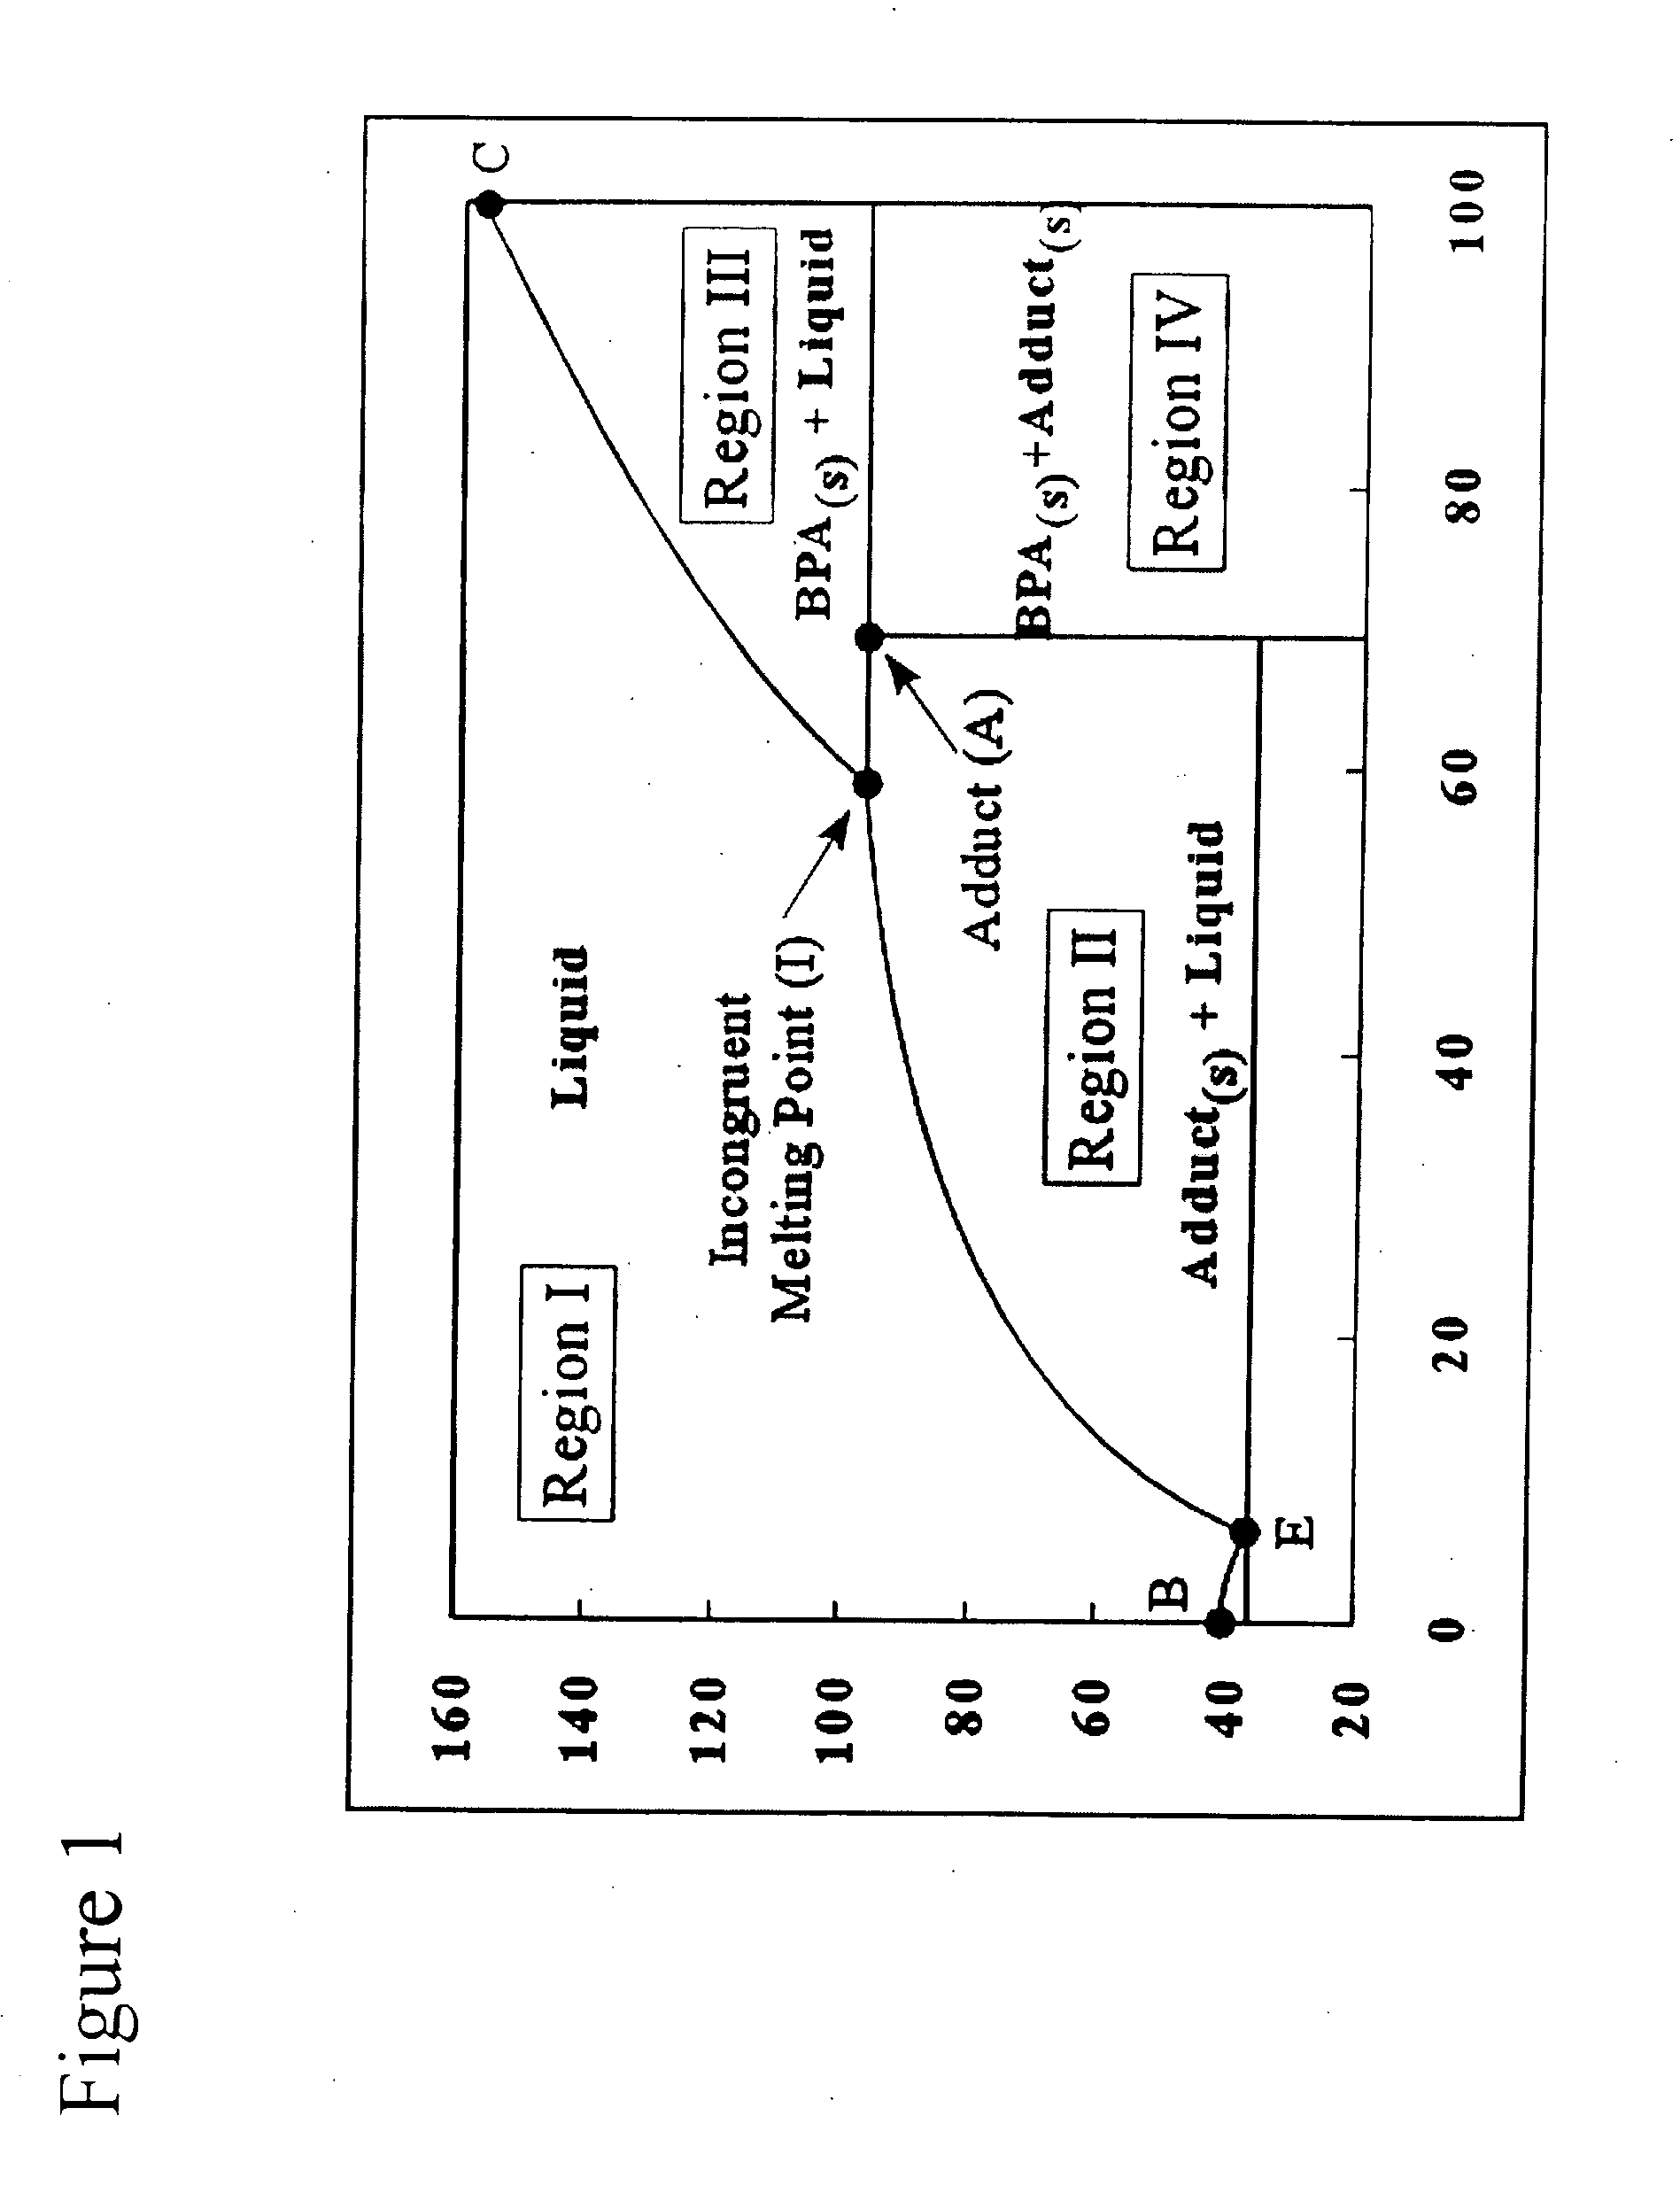 System and method of producing bisphenol-A (BPA) using two stage crystallization